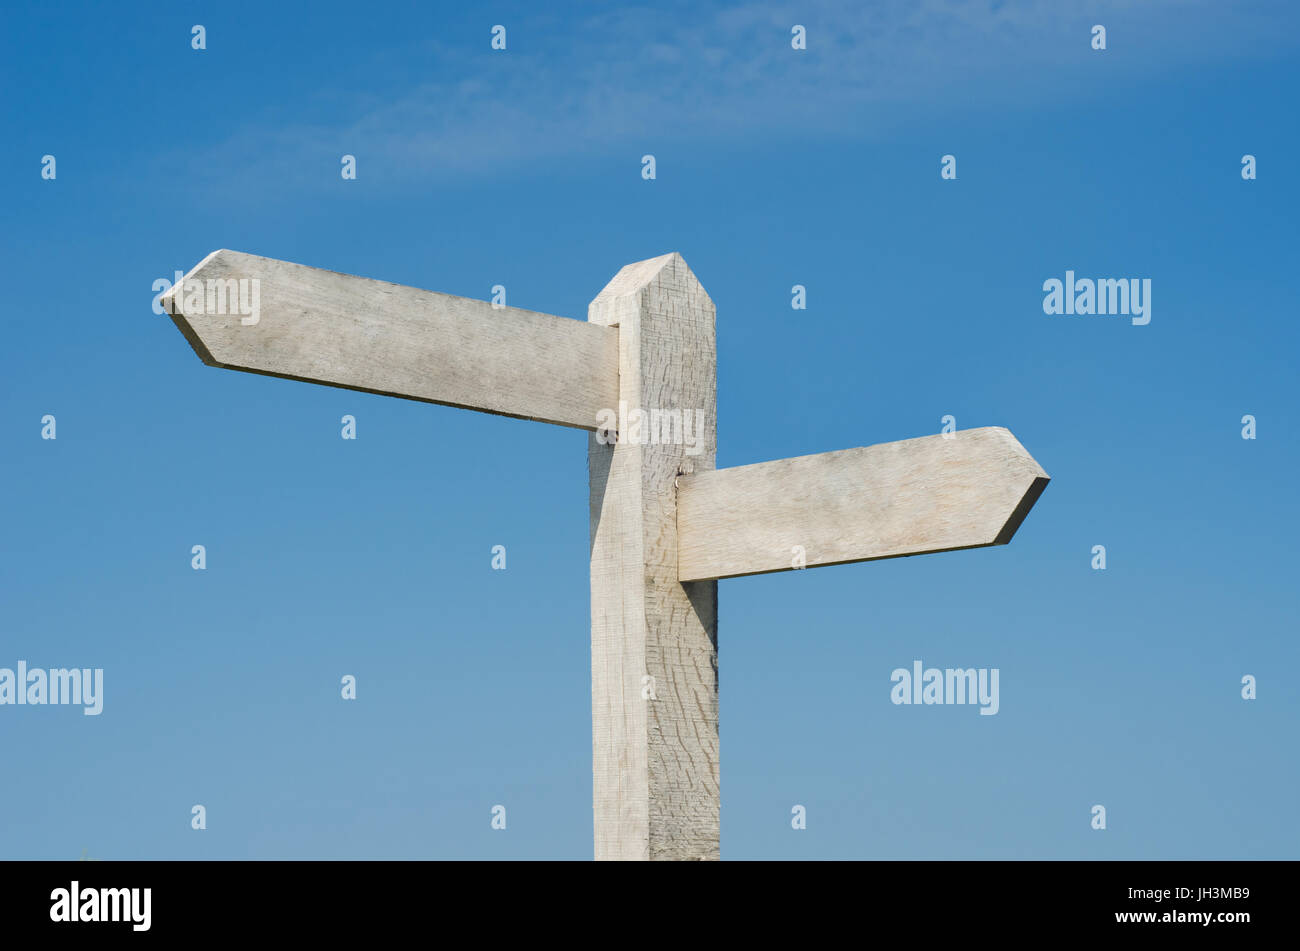 Old wooden signpost with two blank boards pointing  in different directions, weathered to white against bright blue sky with light fluffy clouds. Stock Photo